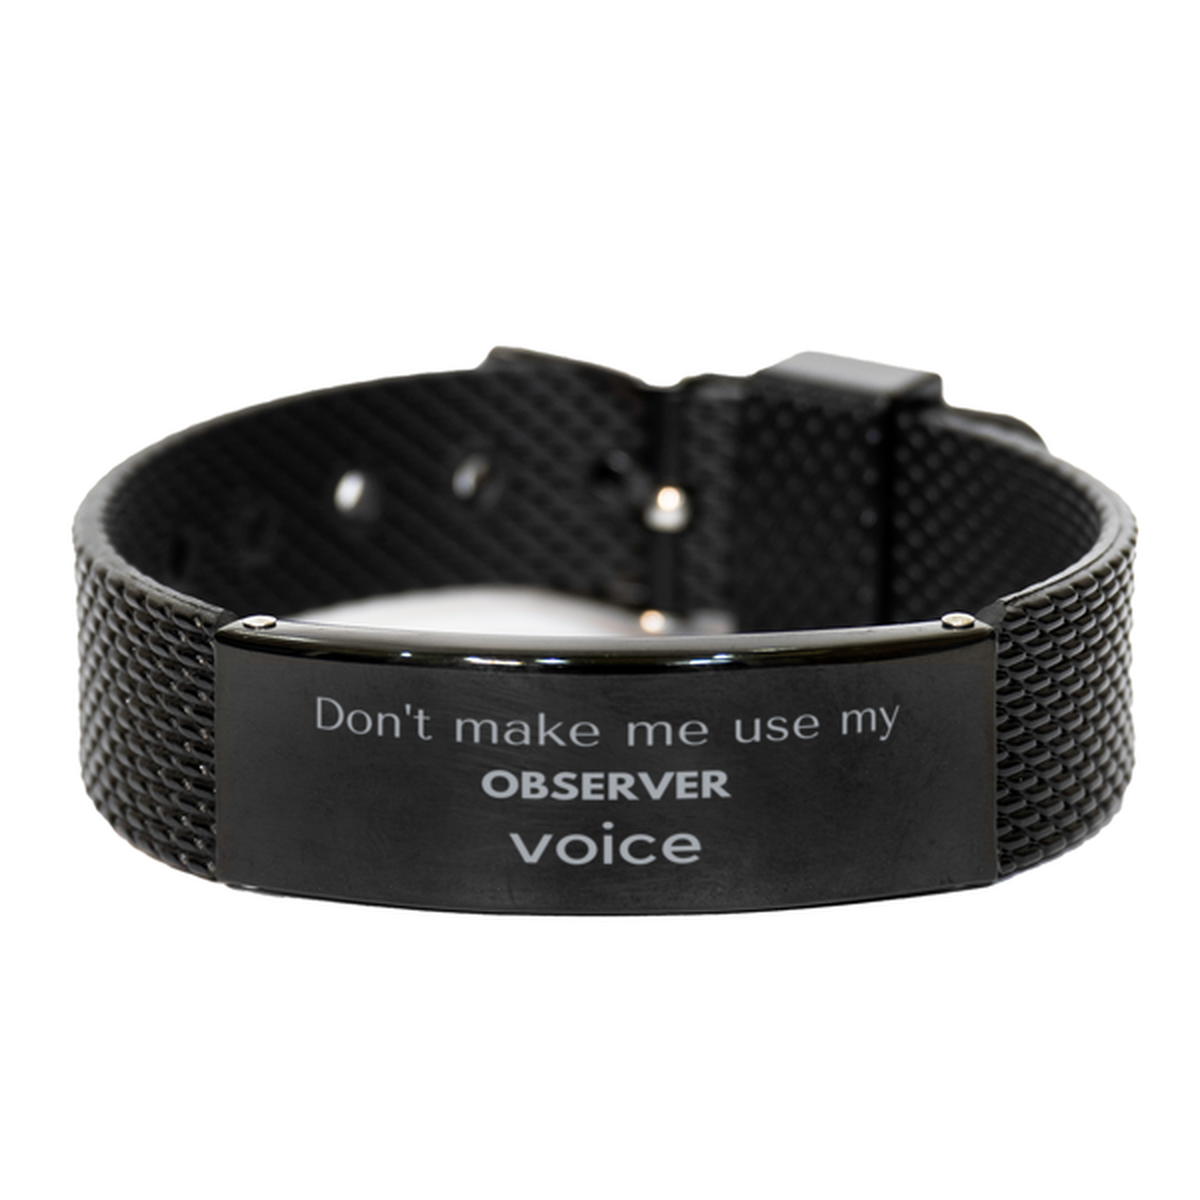 Don't make me use my Observer voice, Sarcasm Observer Gifts, Christmas Observer Black Shark Mesh Bracelet Birthday Unique Gifts For Observer Coworkers, Men, Women, Colleague, Friends